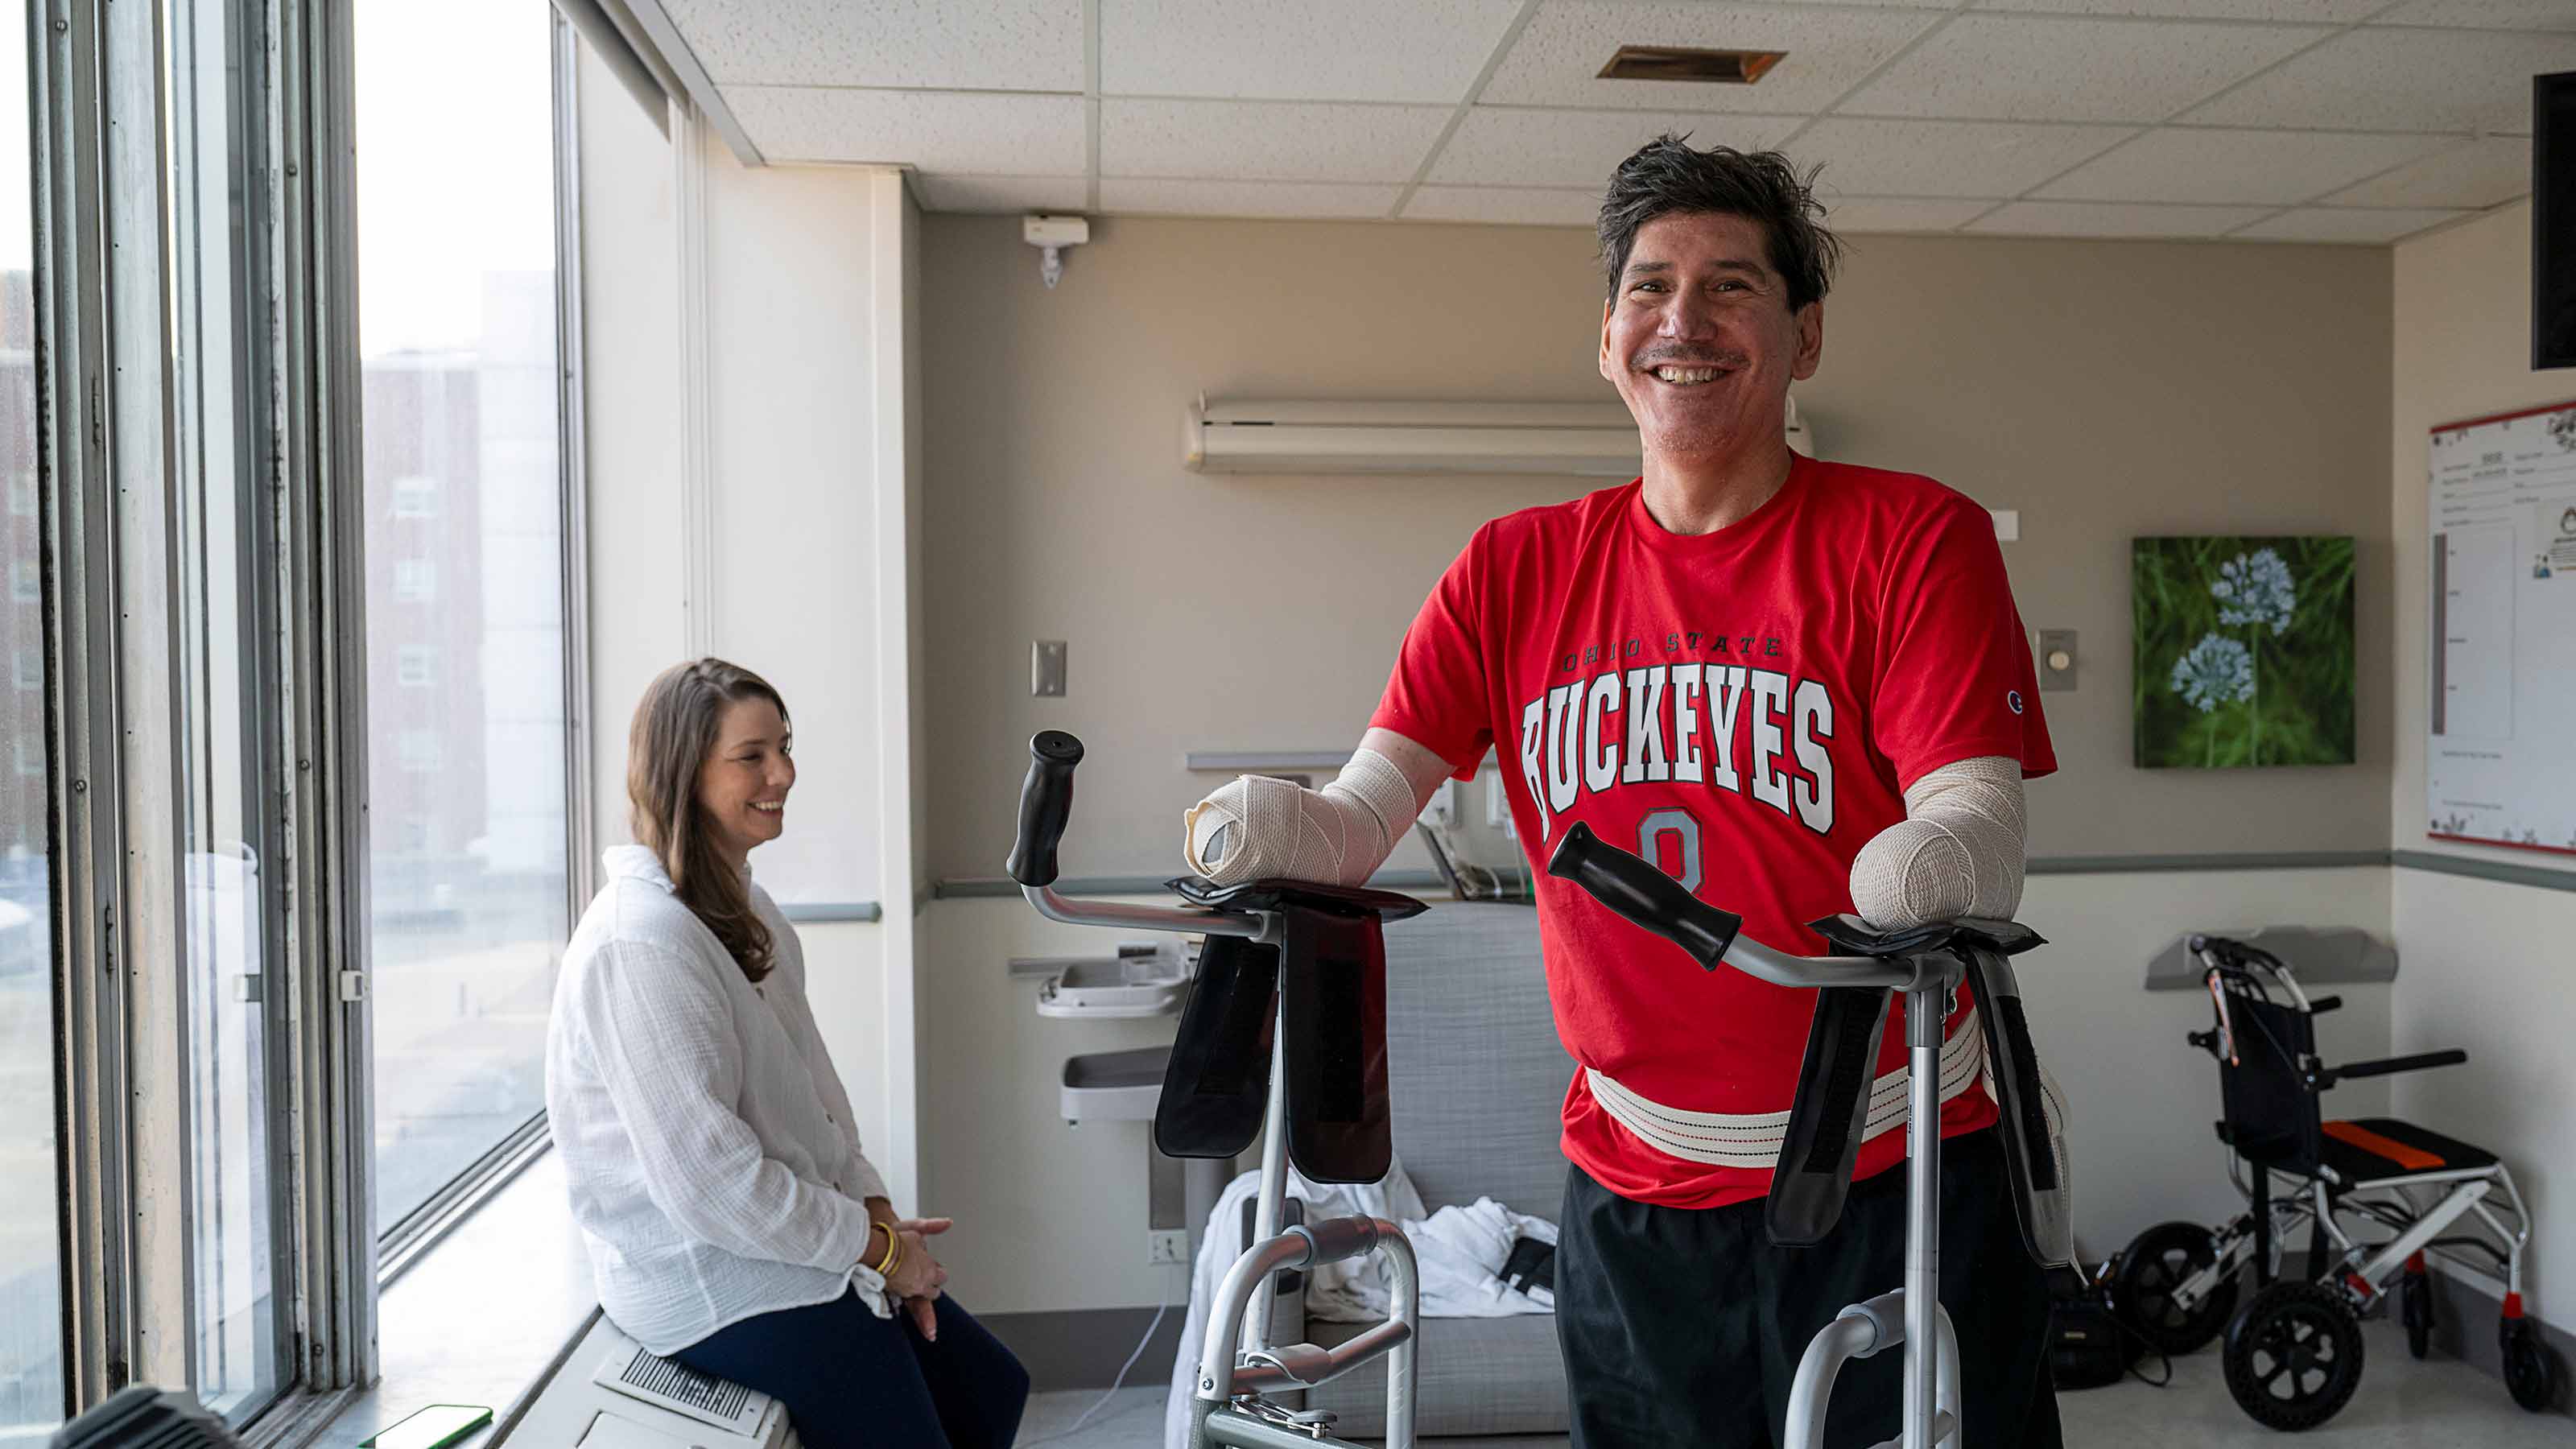 Facing quadruple amputation, Texas man finds hope in Ohio State surgical team